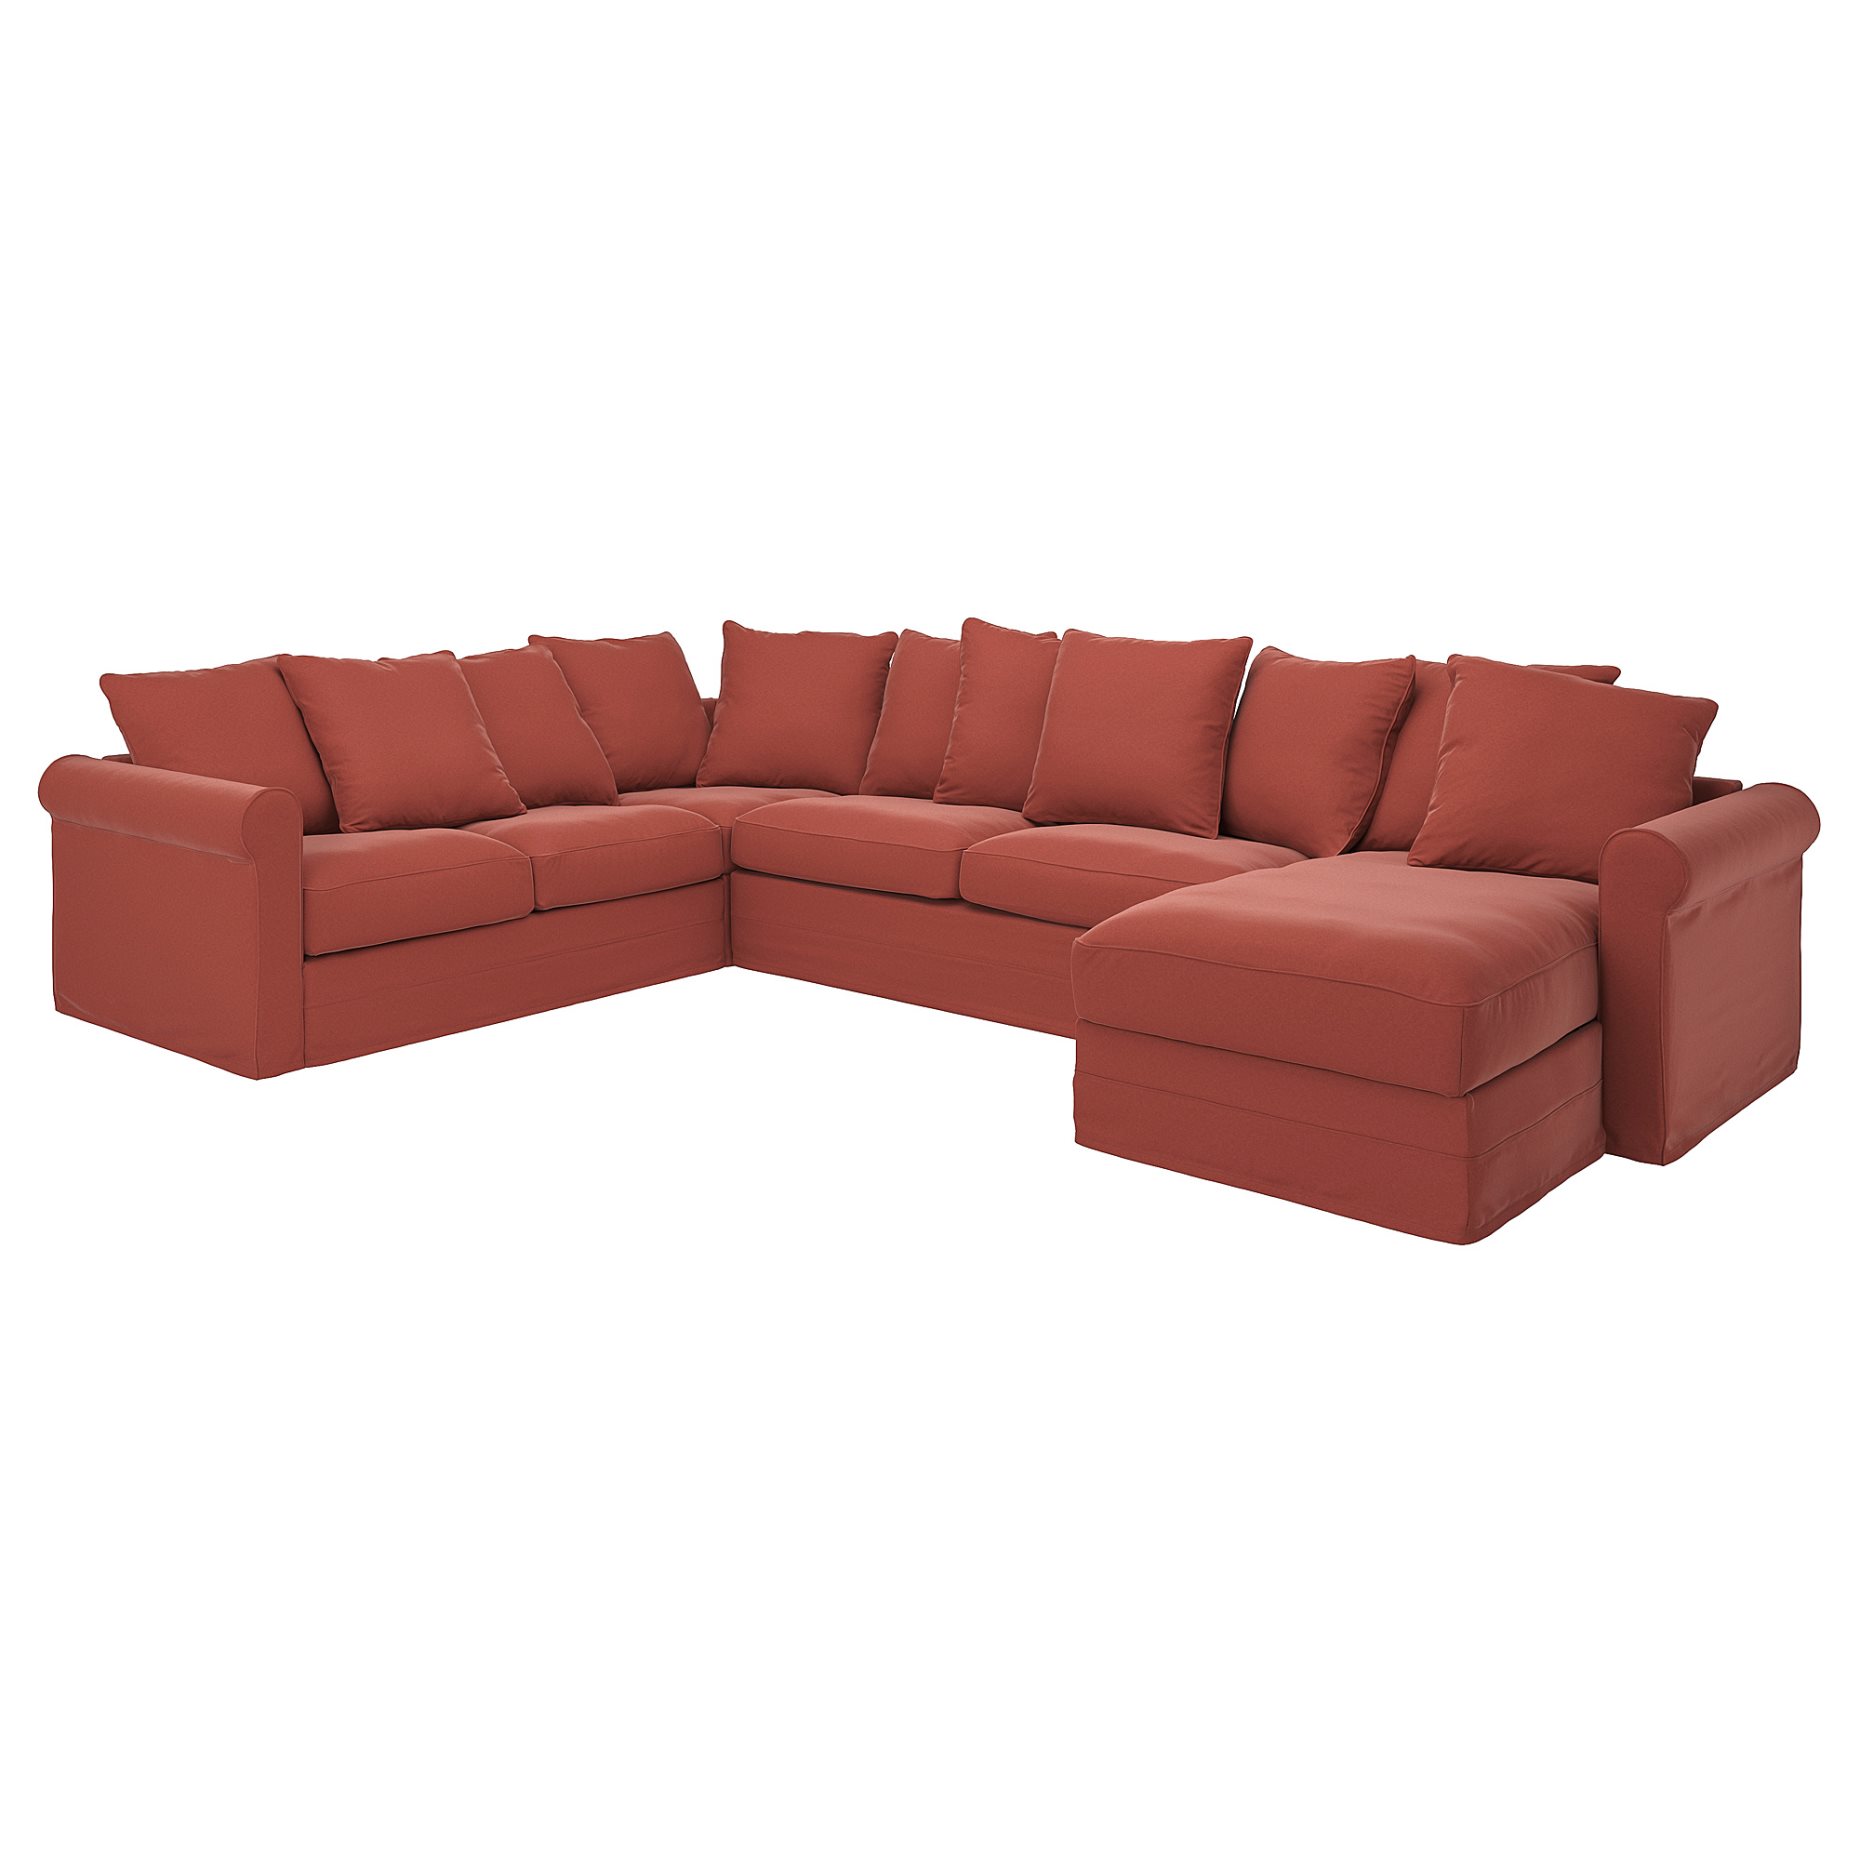 GRÖNLID, corner sofa-bed, 5-seat with chaise longue, 395.365.57